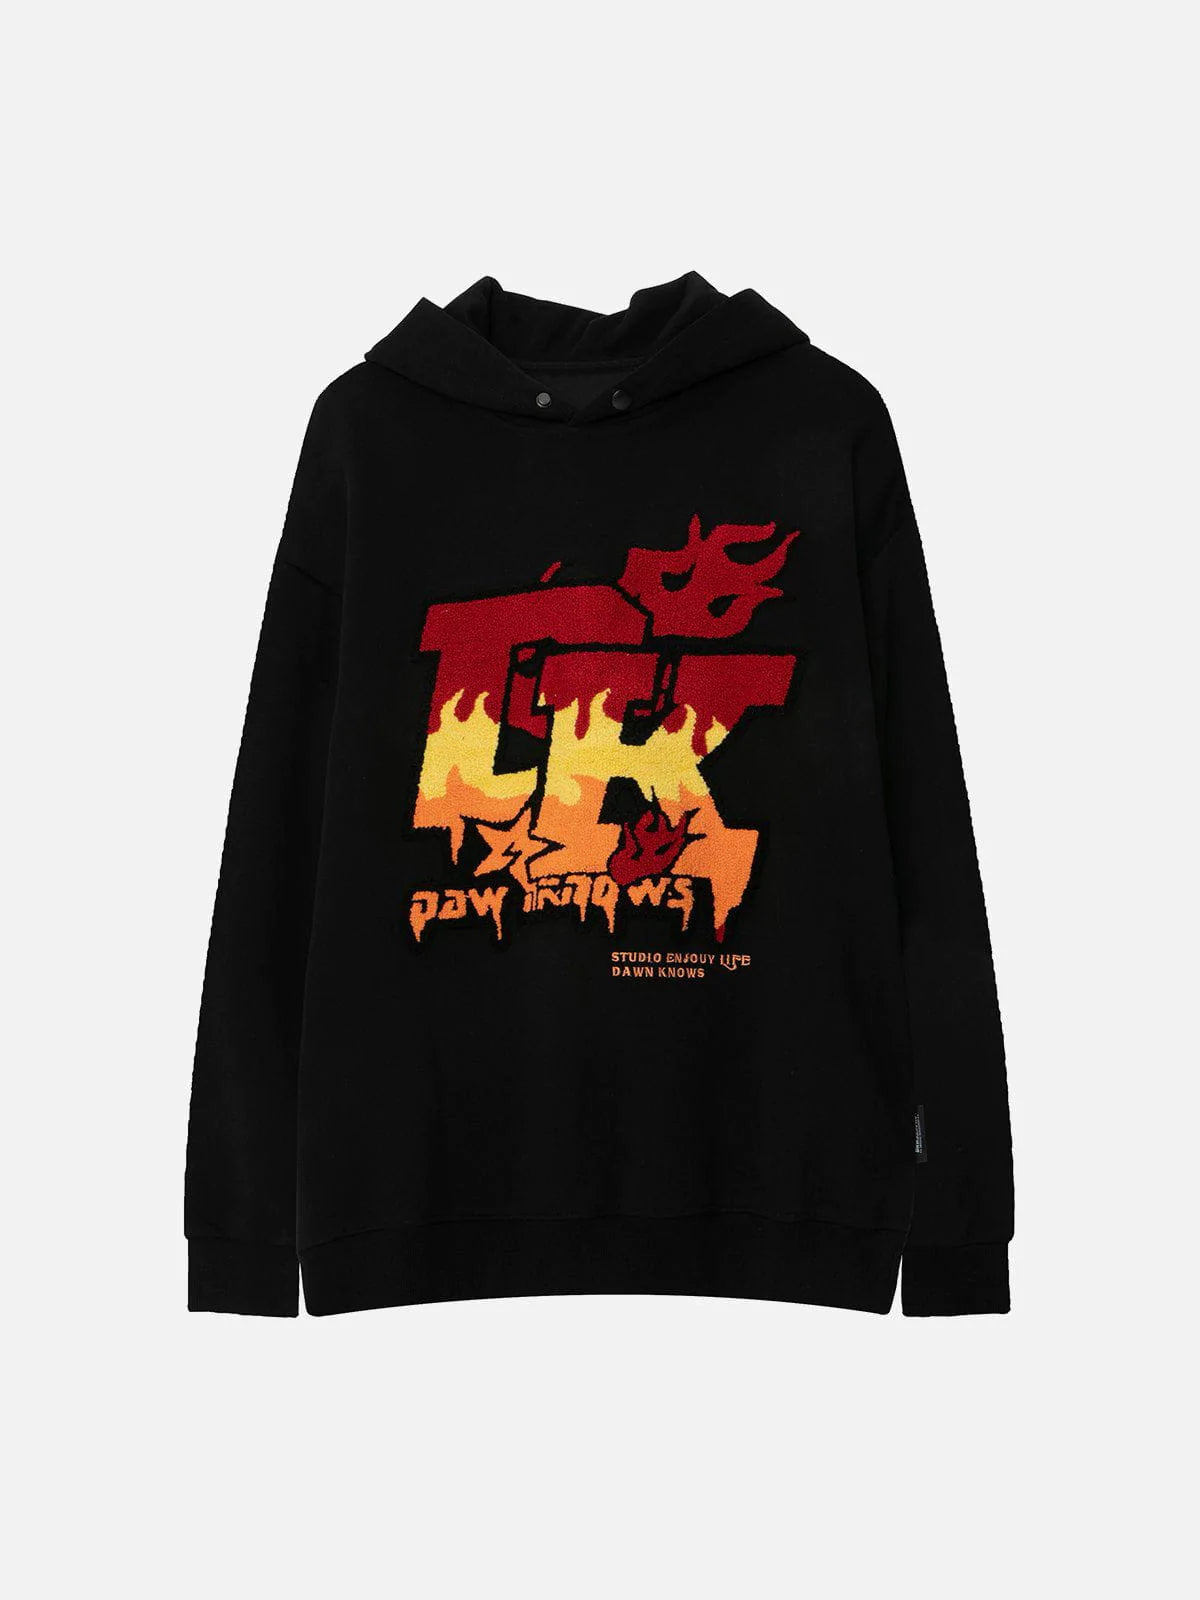 Faire Echo "DK" Flame Embroidery Hoodie